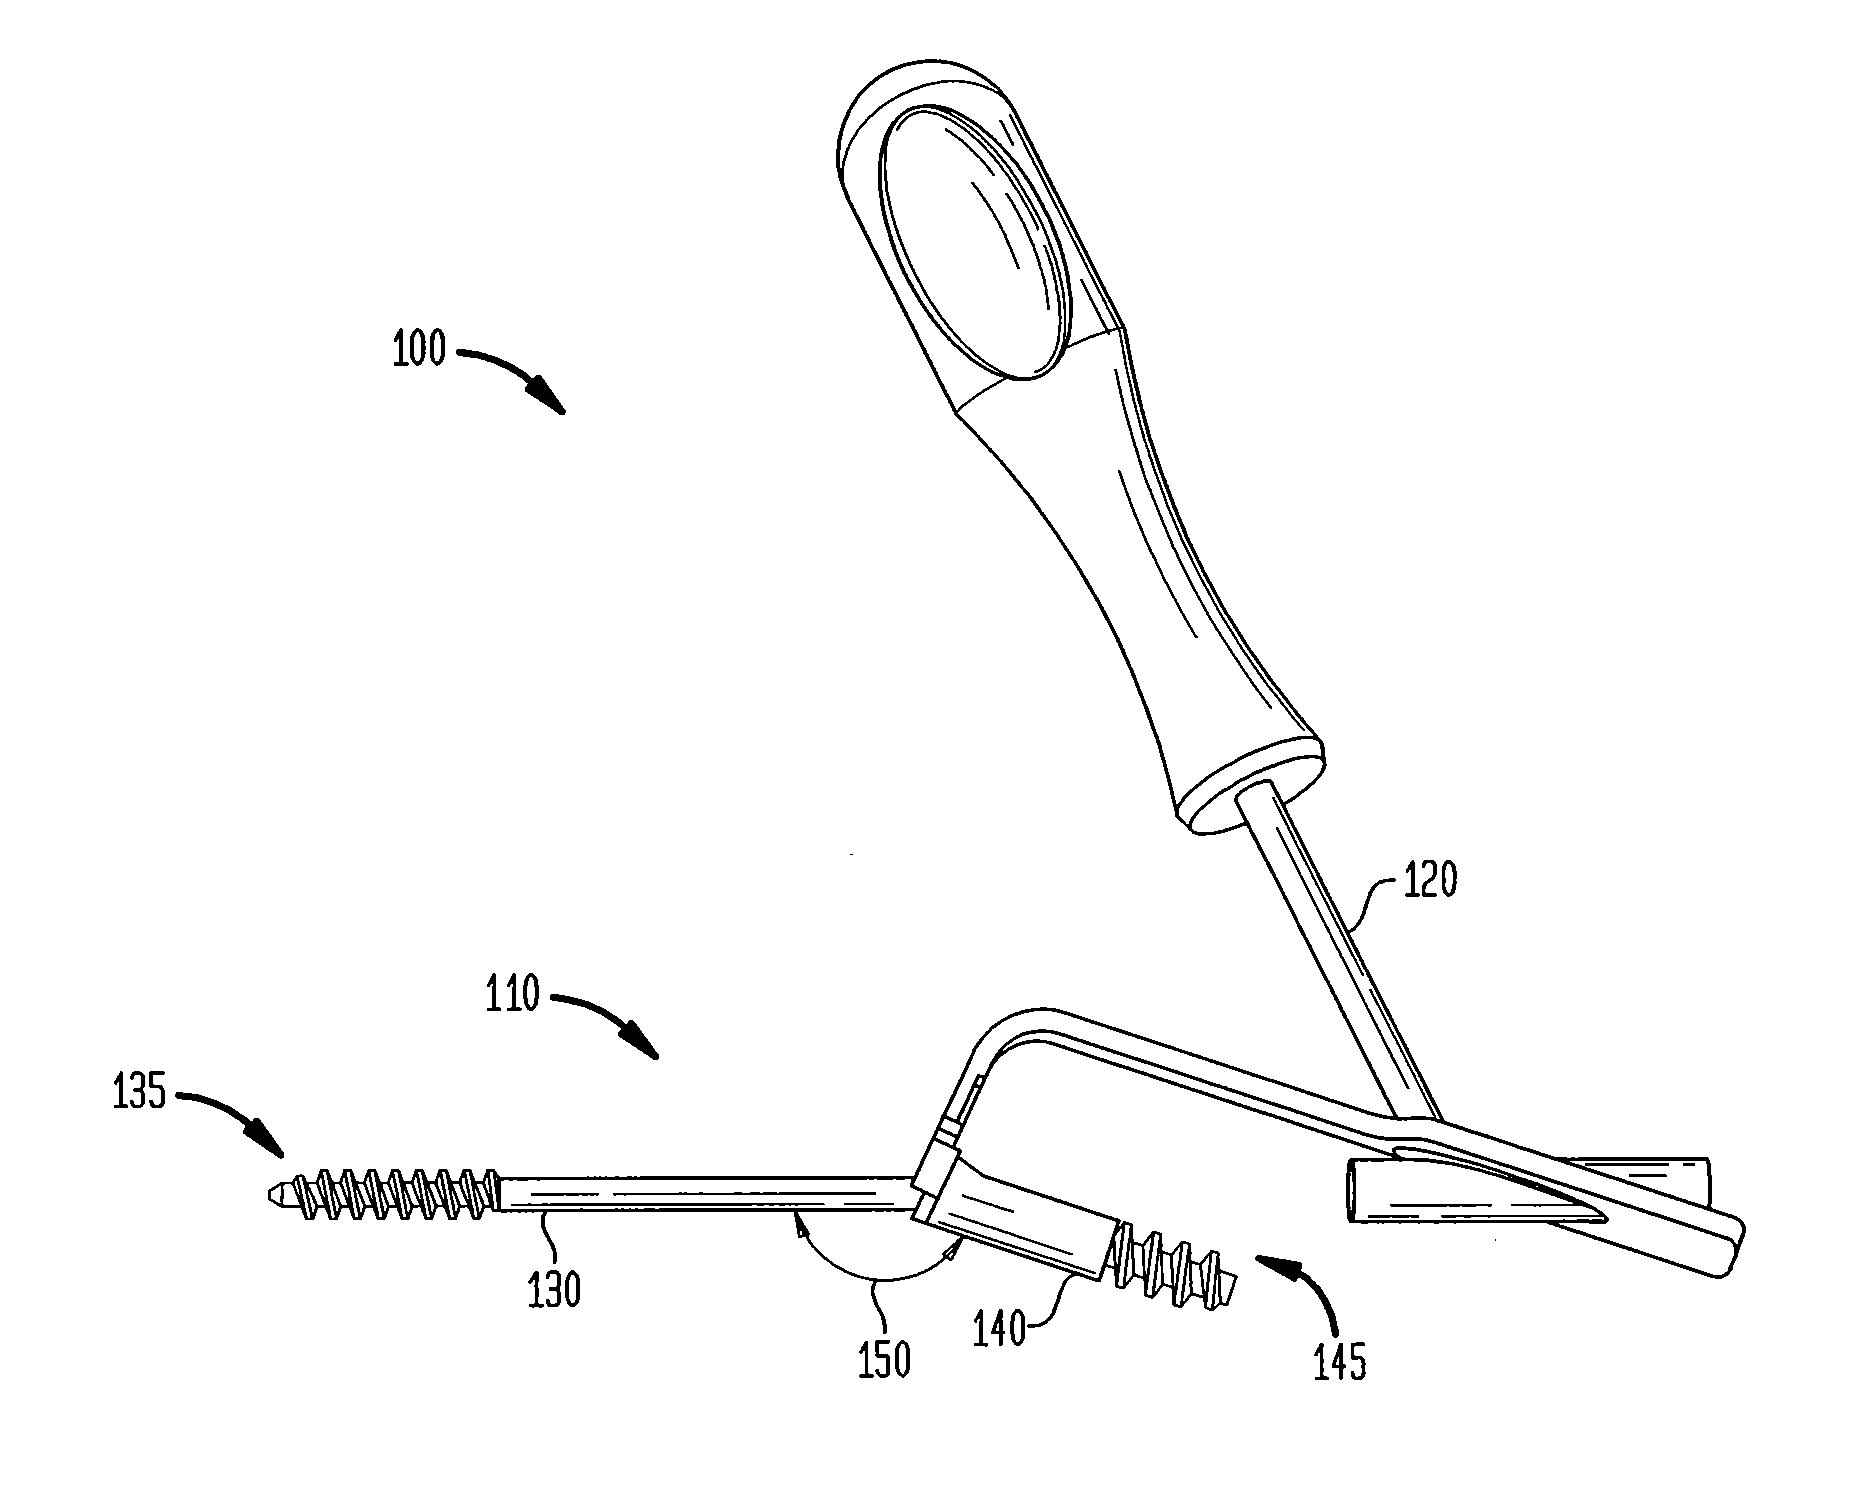 Hybrid intramedullary fixation assembly and method of use